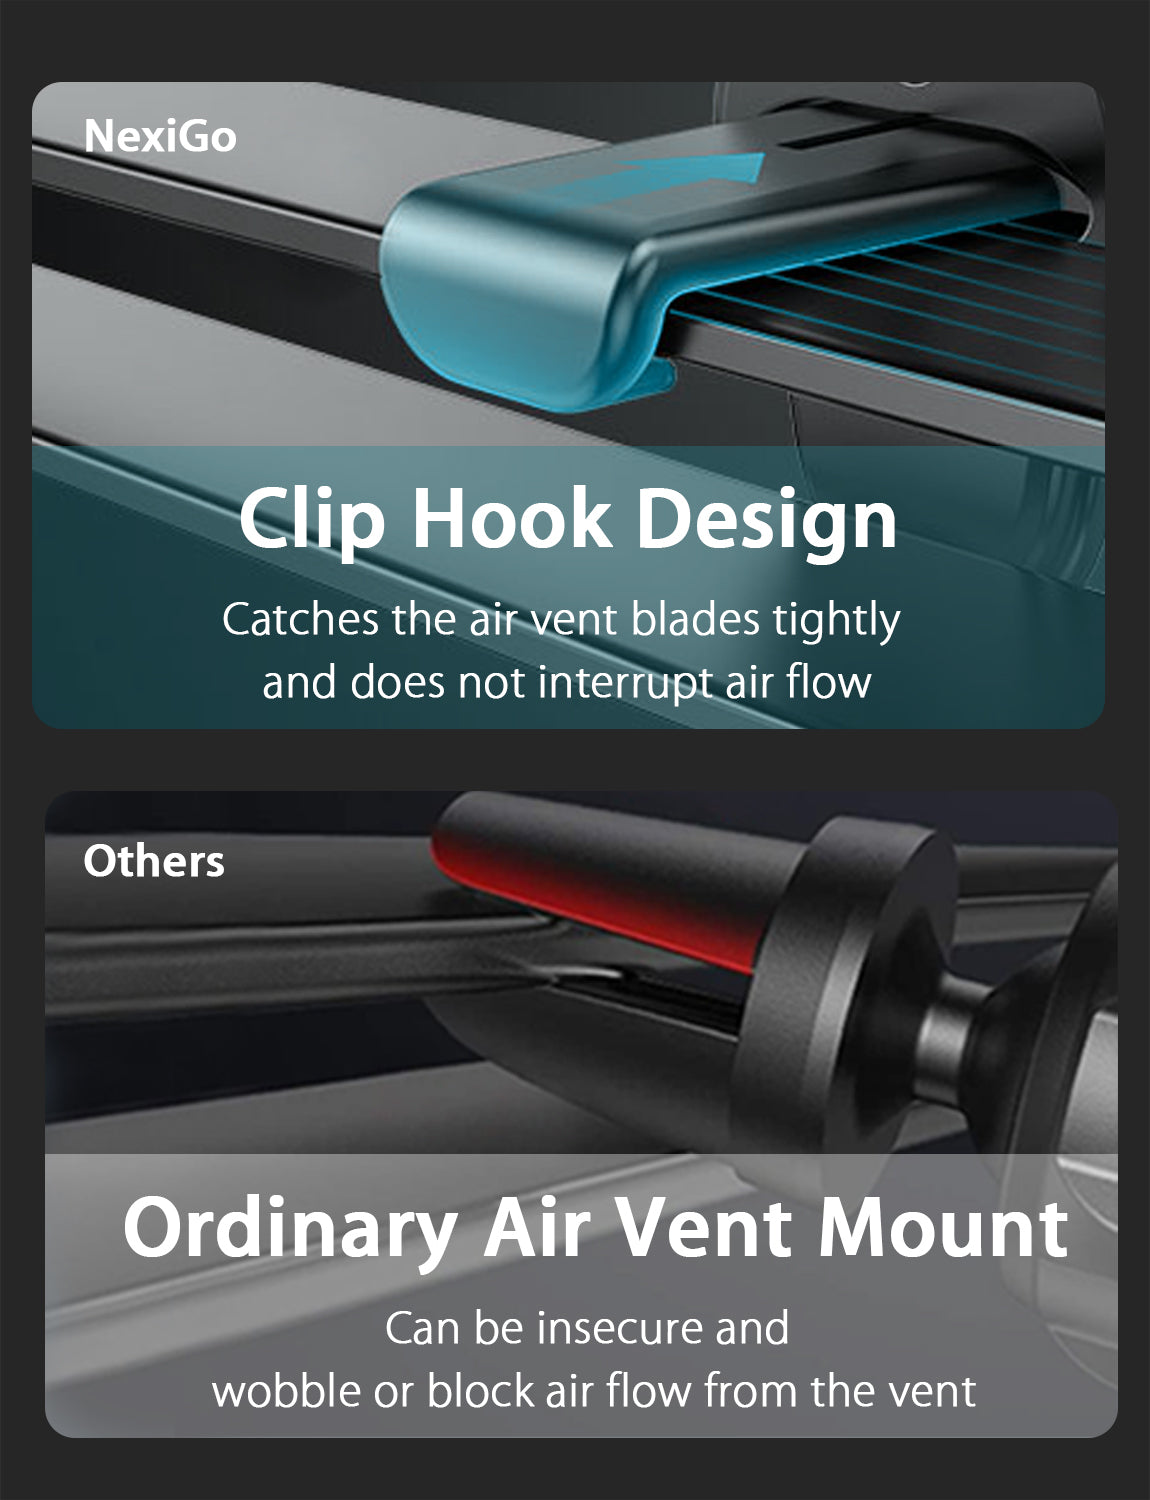 Our mount's clamp hook design securely grips ventilation blades without blocking airflow.